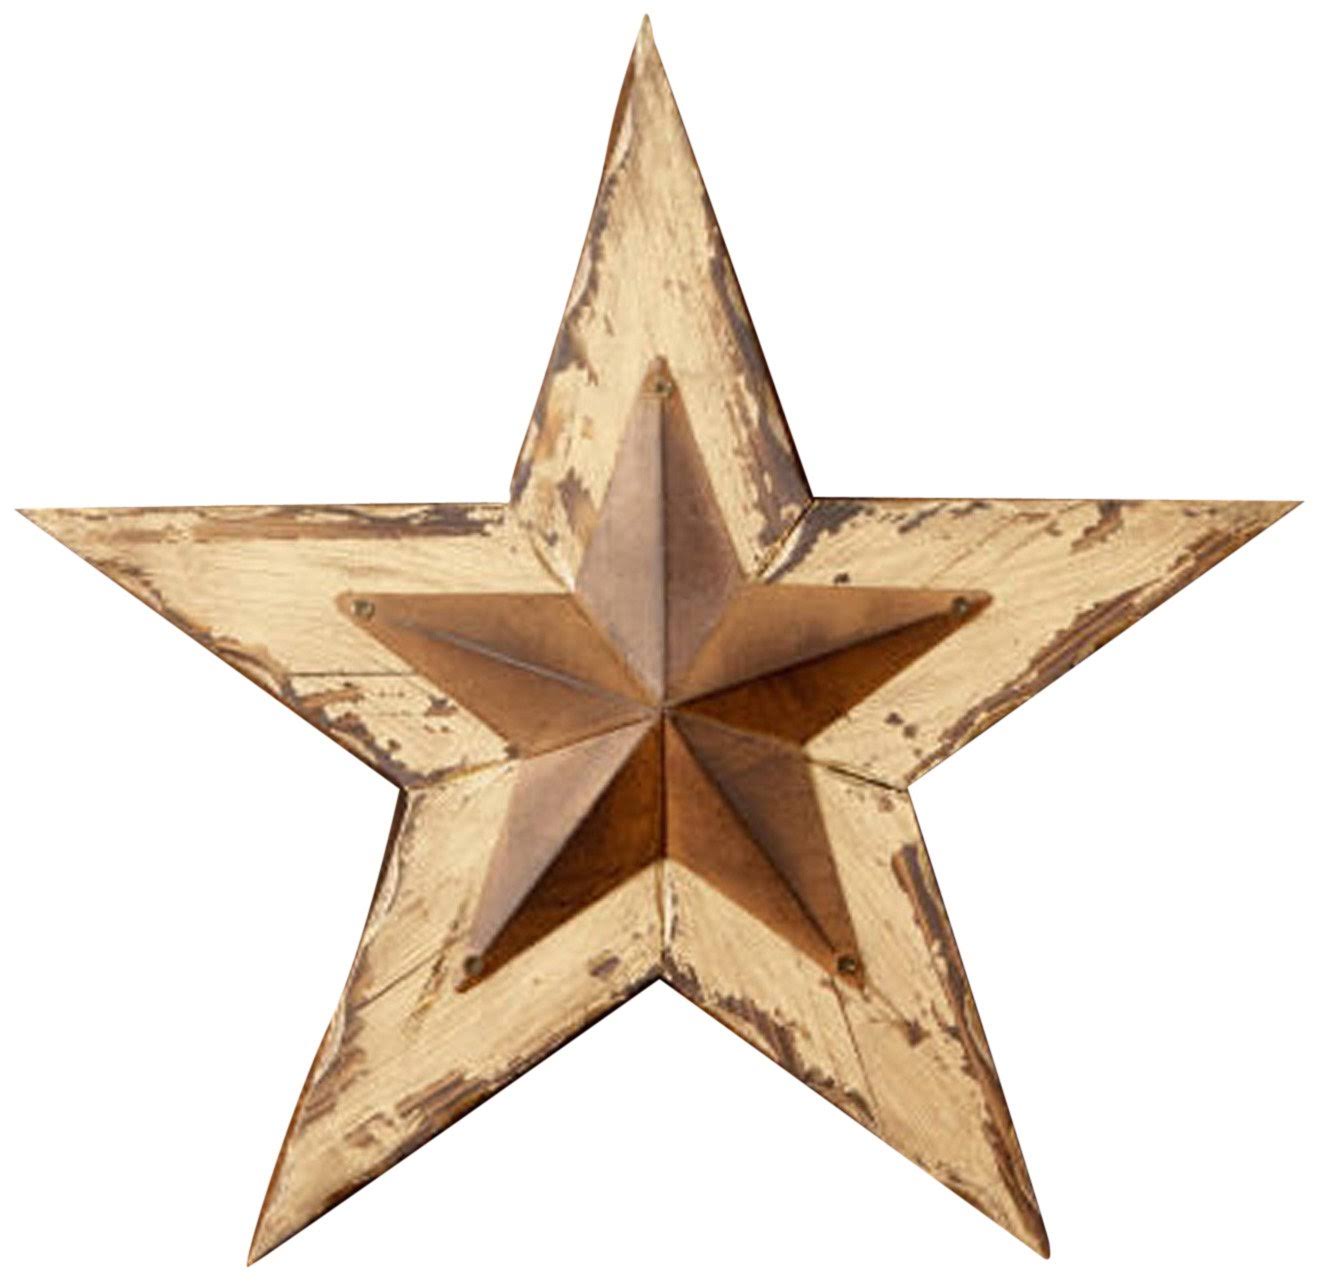 Your Heart's Delight Distressed Decor Wood with Rusty Star, Tan, 16 x 15-inch